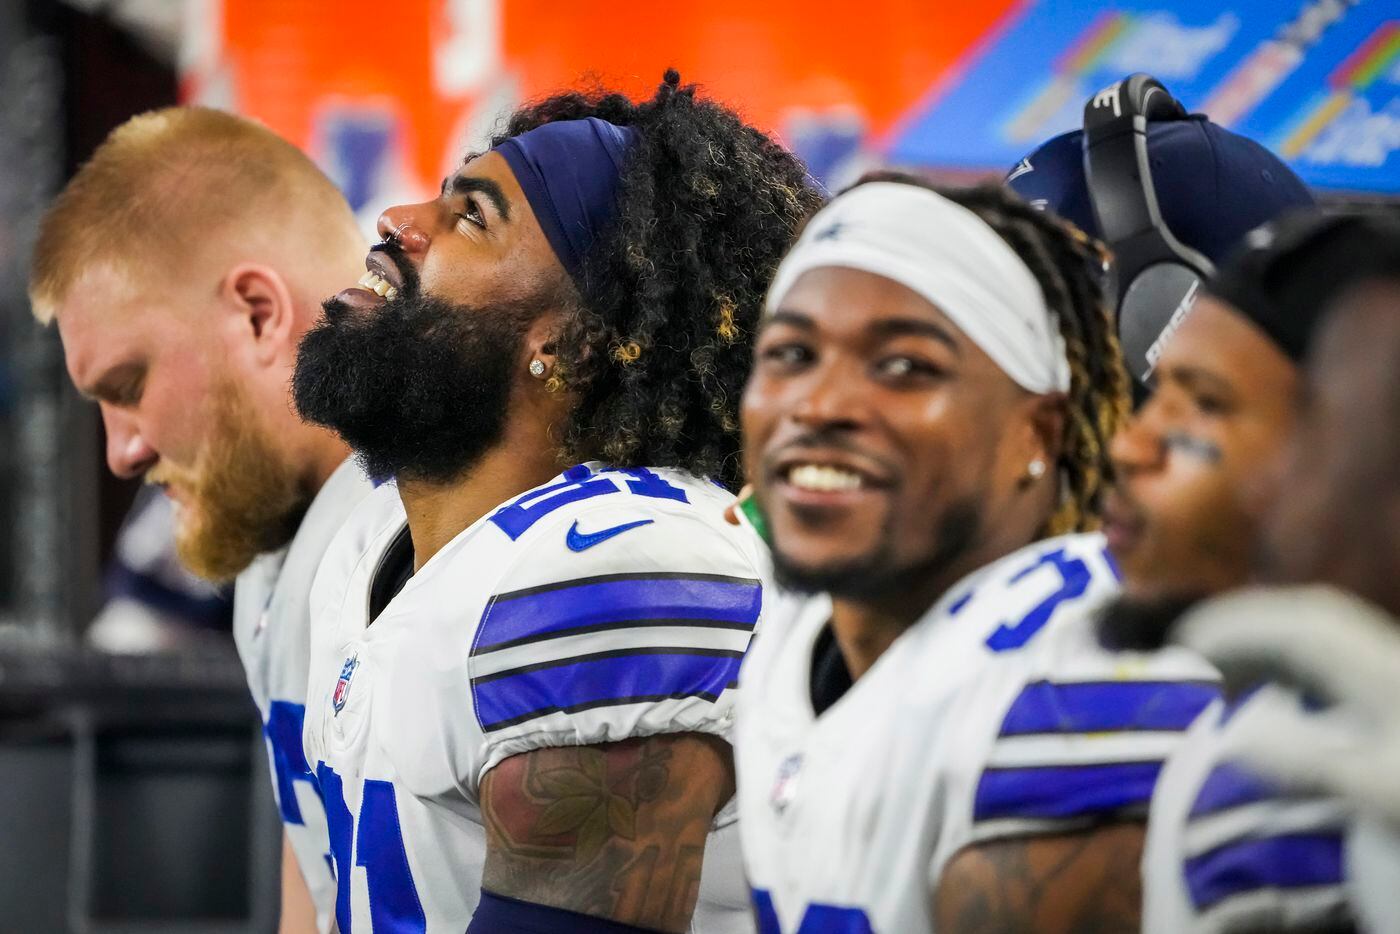 Dallas Cowboys running back Ezekiel Elliott (21) looks up at the scoreboard as he watches from the bench during the second half of an NFL football game against the Washington Football Team at AT&T Stadium on Sunday, Dec. 26, 2021, in Arlington. The Cowboys won the game 56-14.